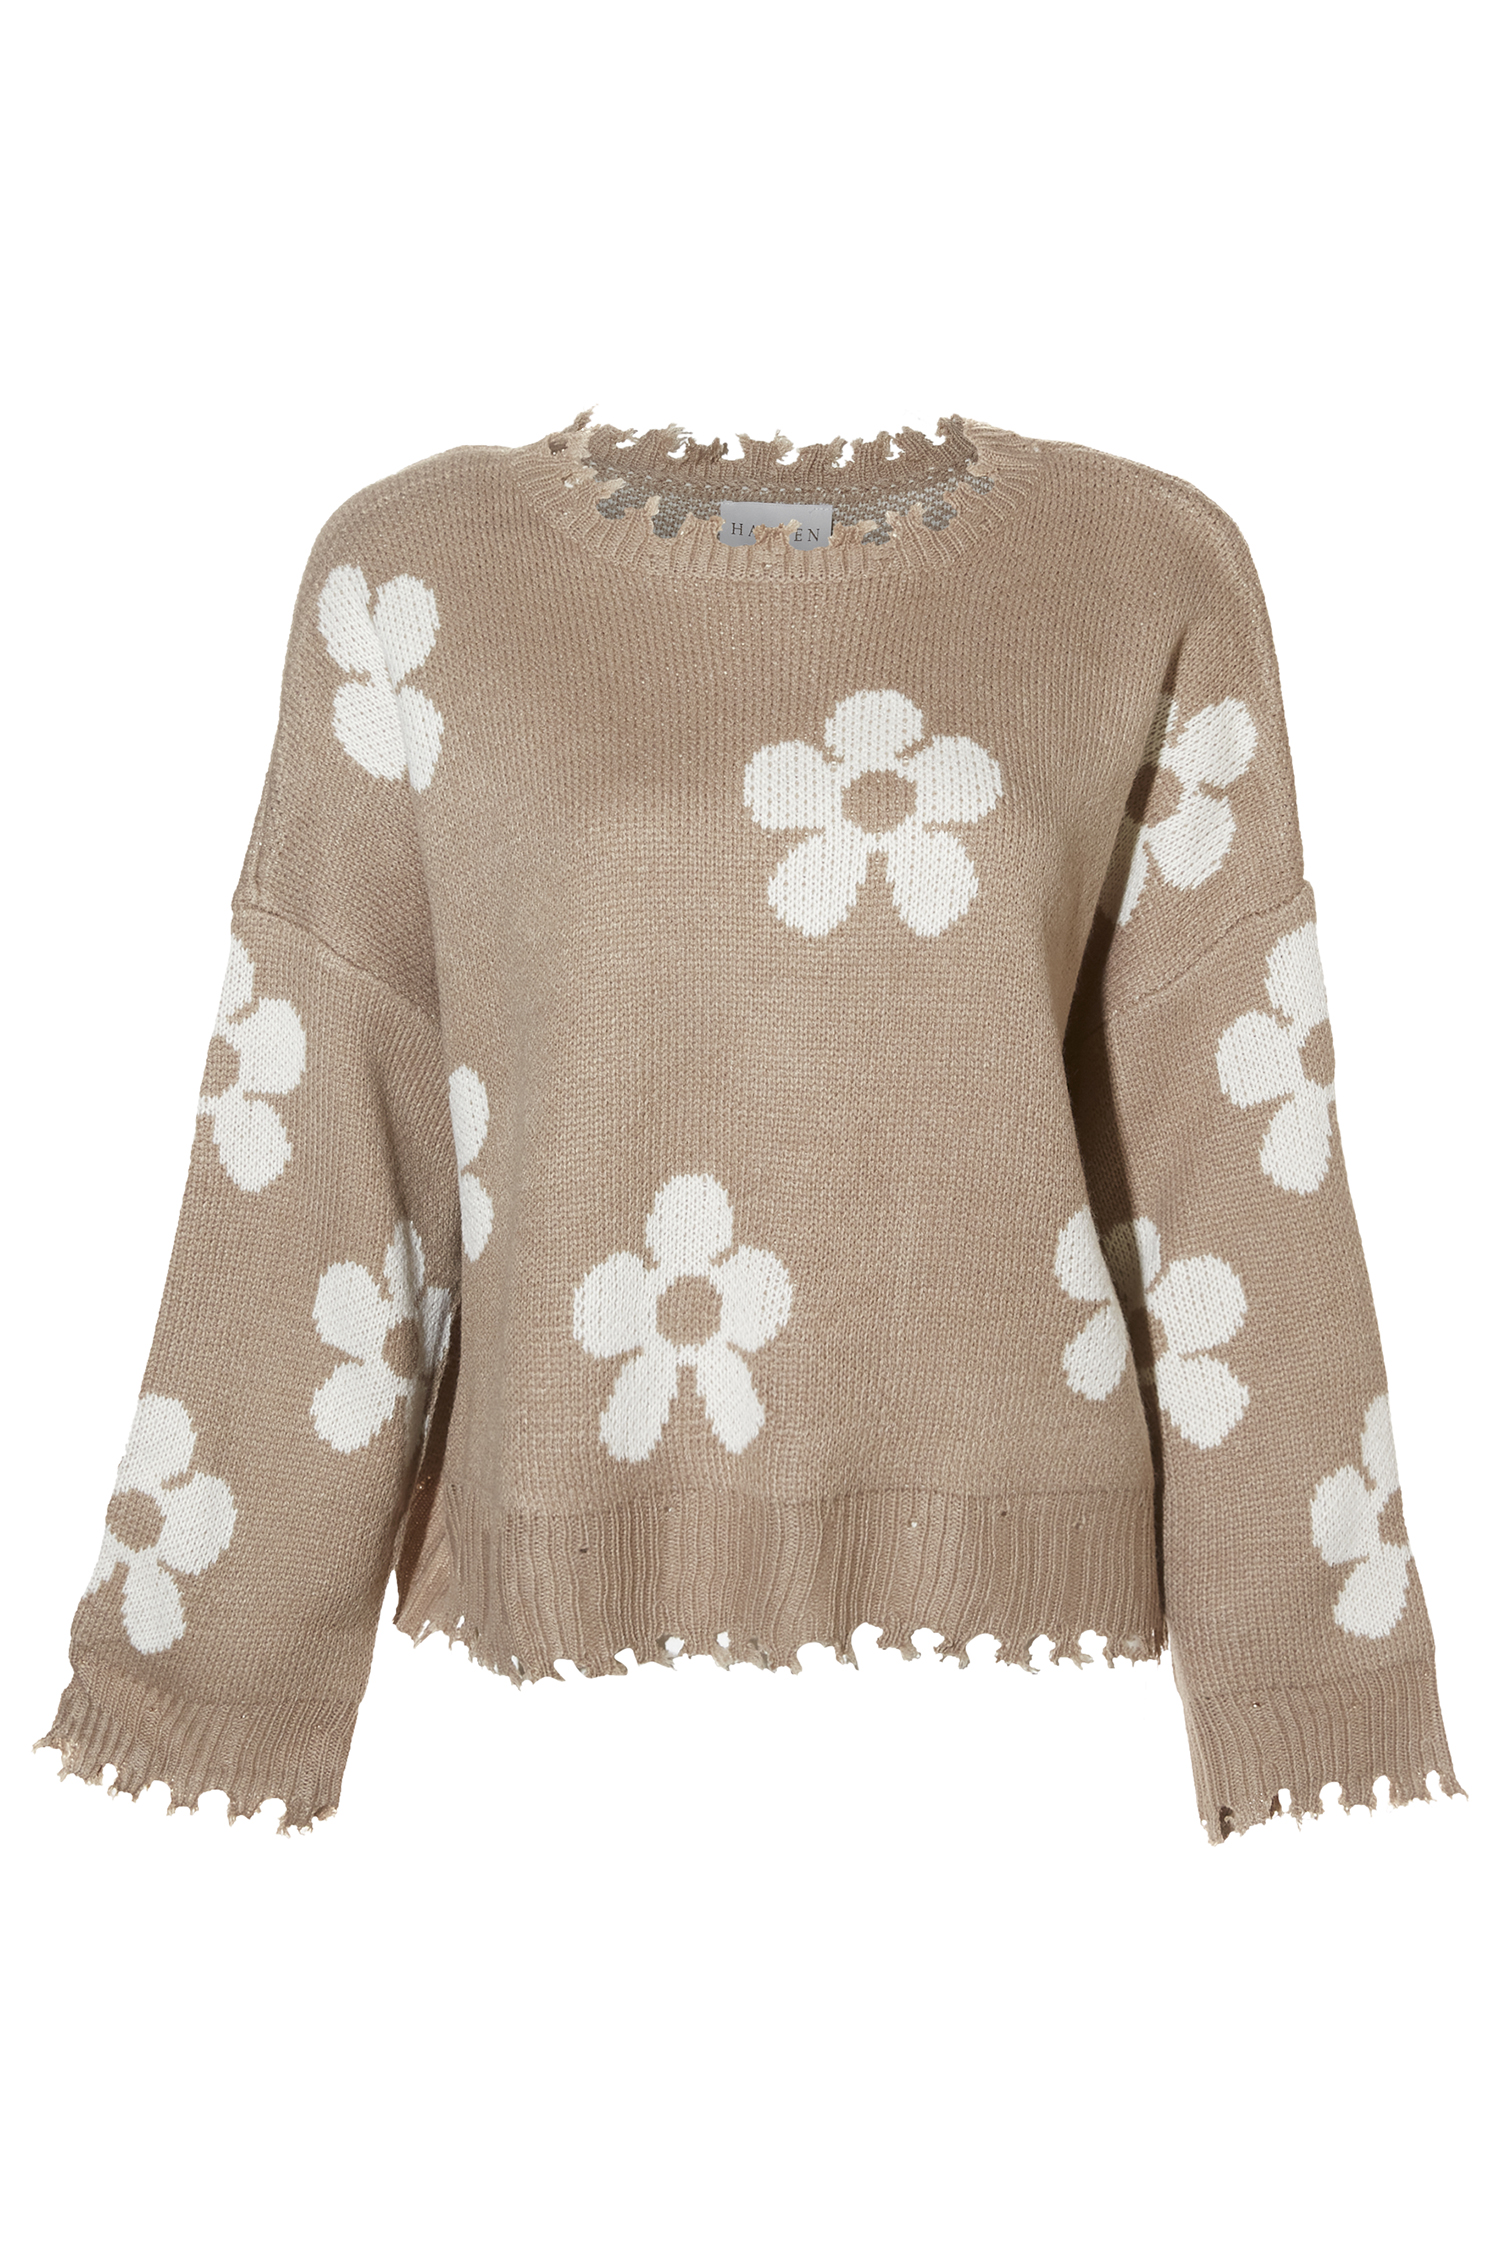 Distressed Floral Patterned Pullover Sweater